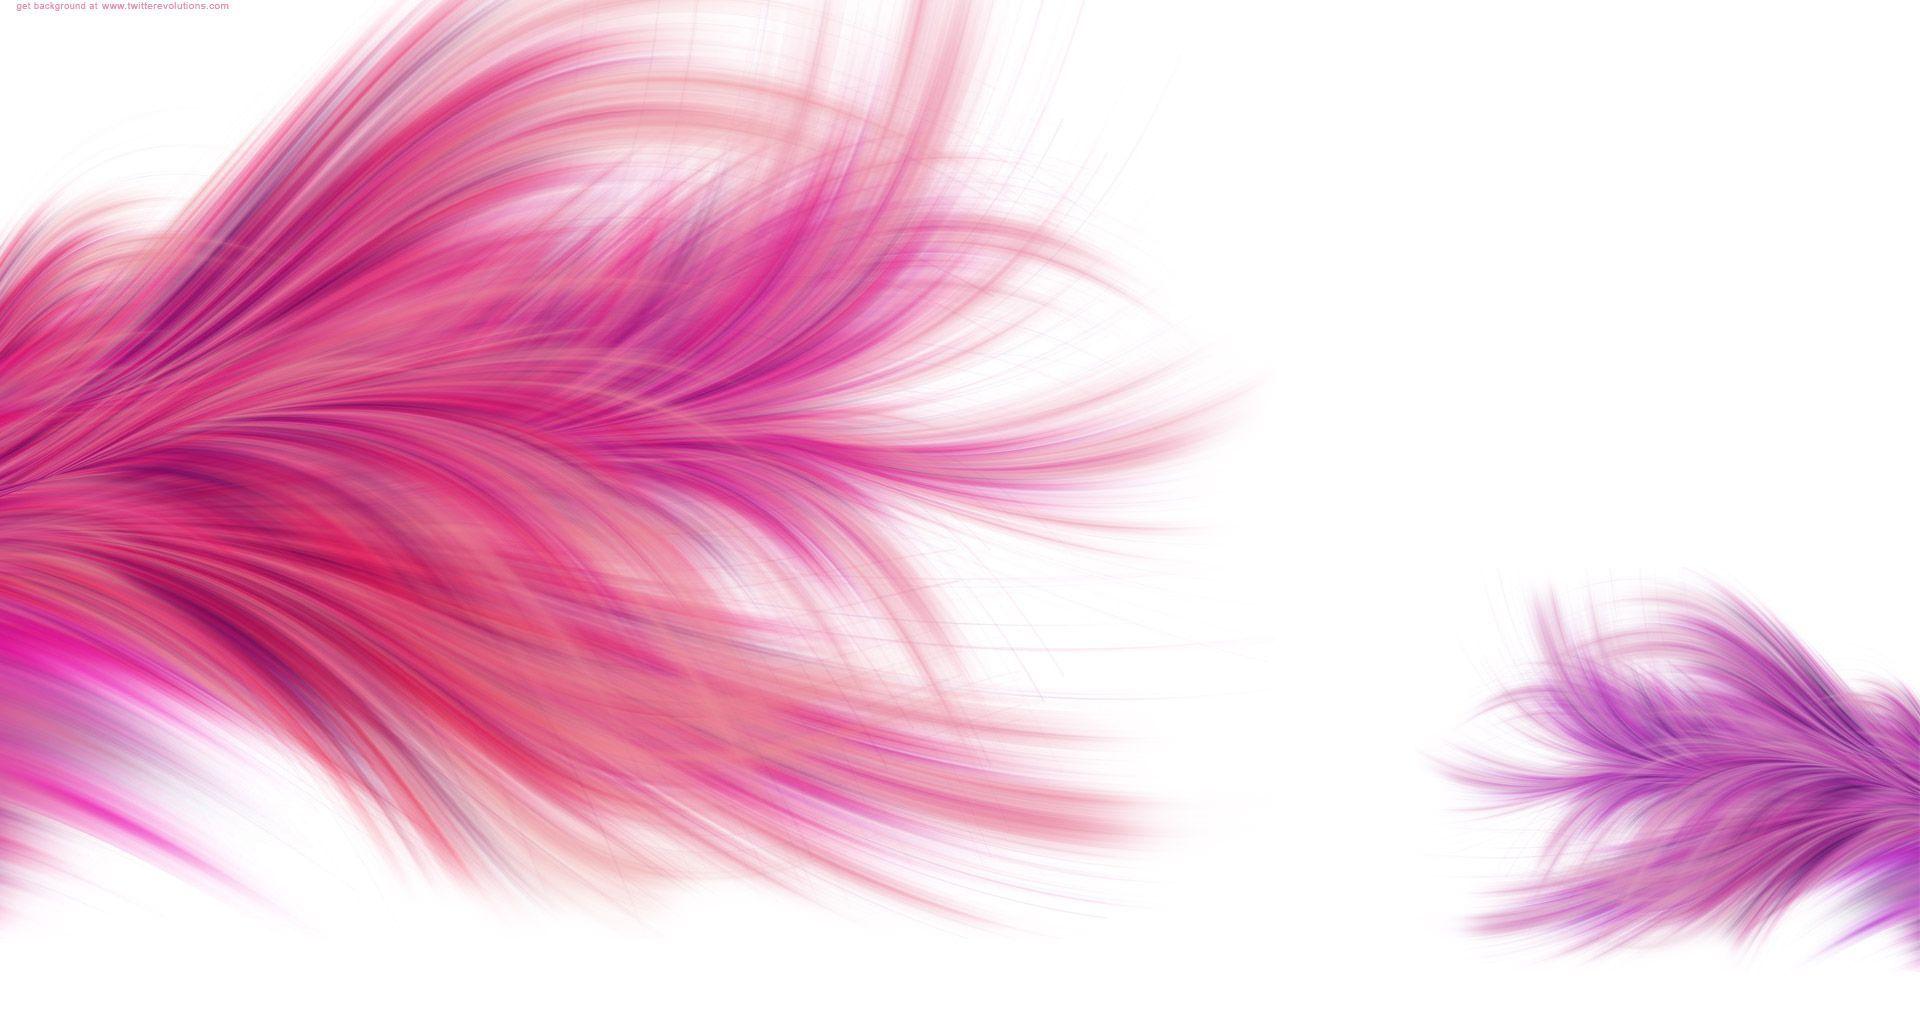 graphic design with hot pink. Pink feather Twitter background